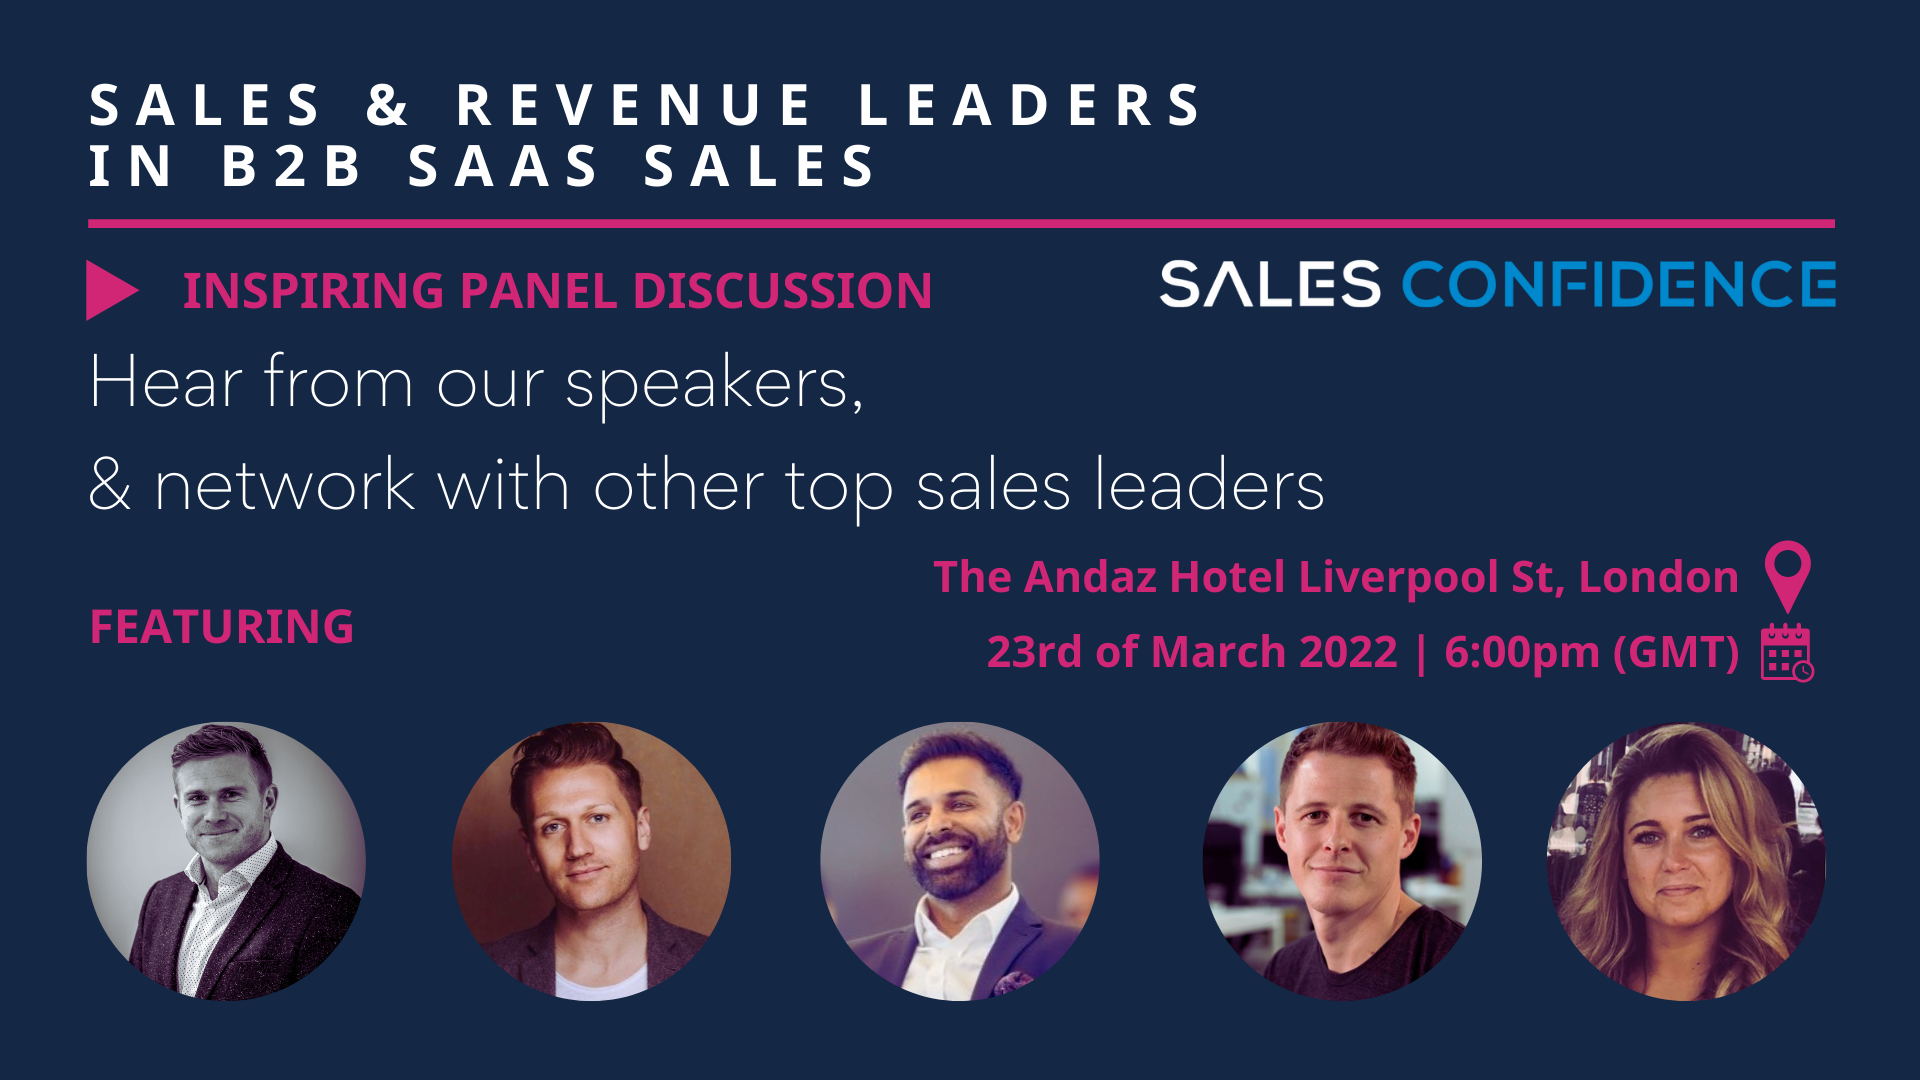 Sales Confidence B2B SaaS Sales & Revenue Leaders In-Person Event | 23rd March 2022 | Co-Hosted By Owen Richards